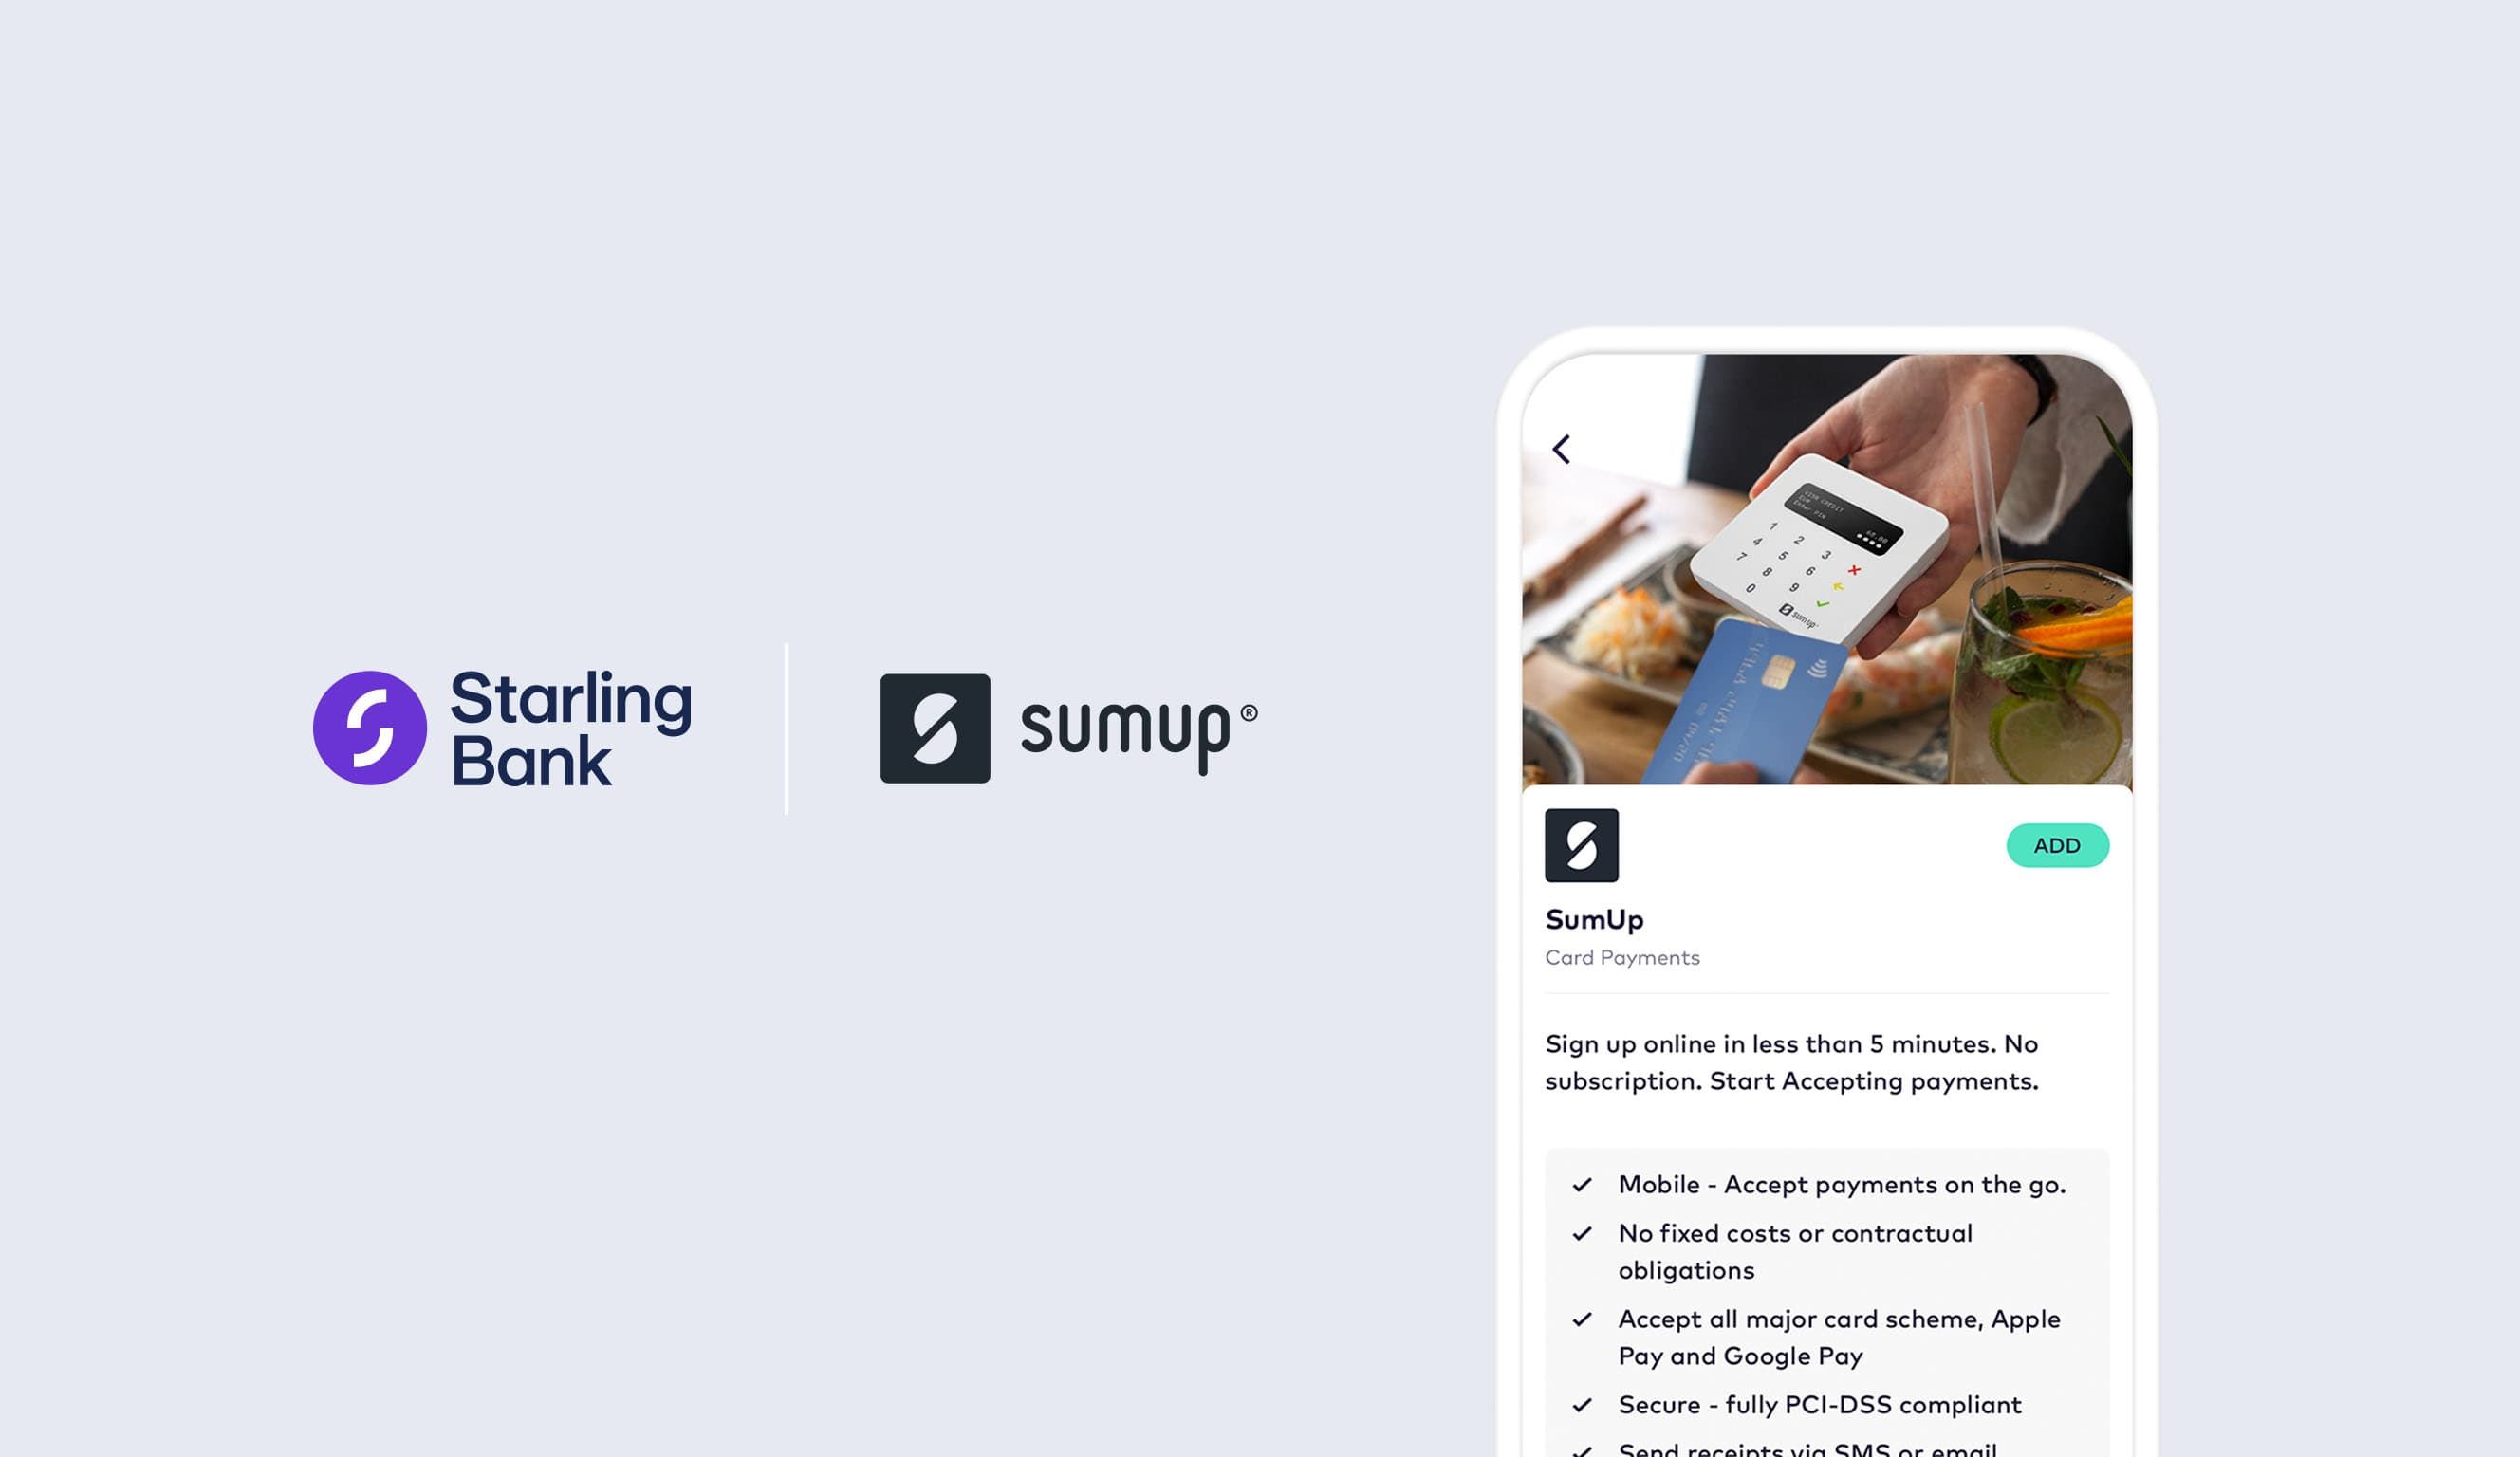 Image of the SumUp integration in the Starling app, with a photo of SumUp card reader taking a payment